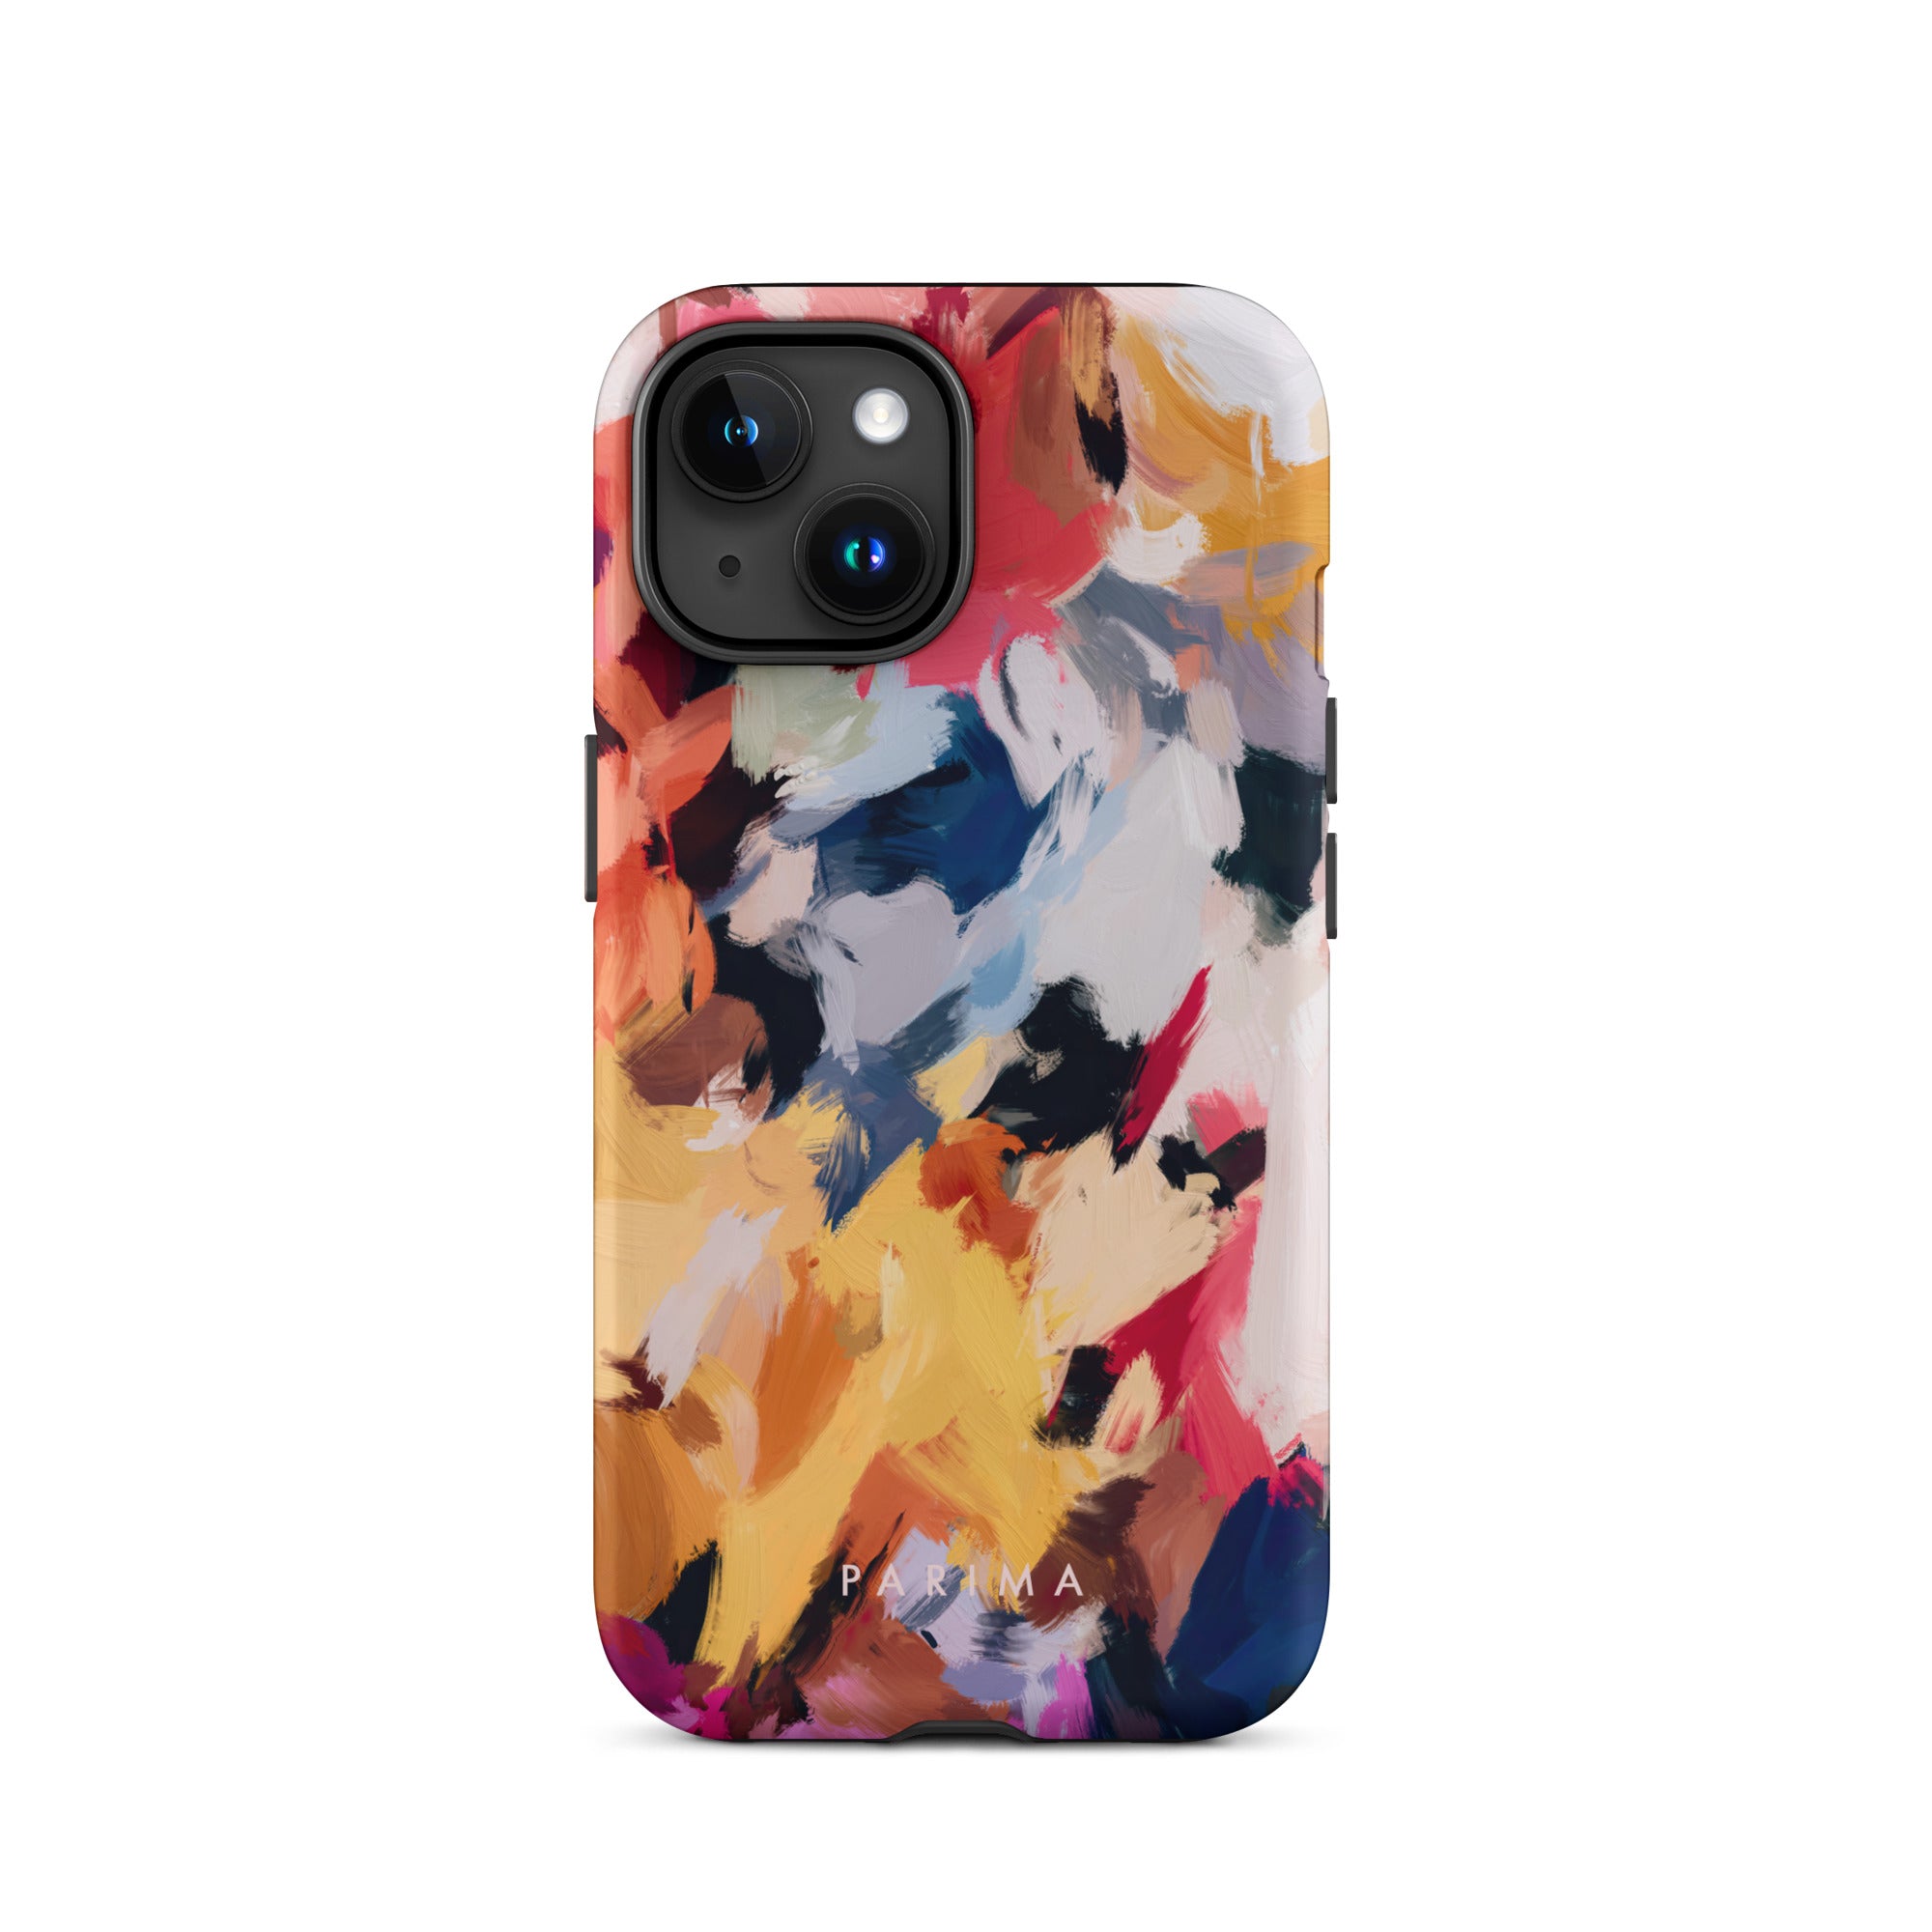 Wilde, blue and yellow abstract art on iPhone 15 tough case by Parima Studio